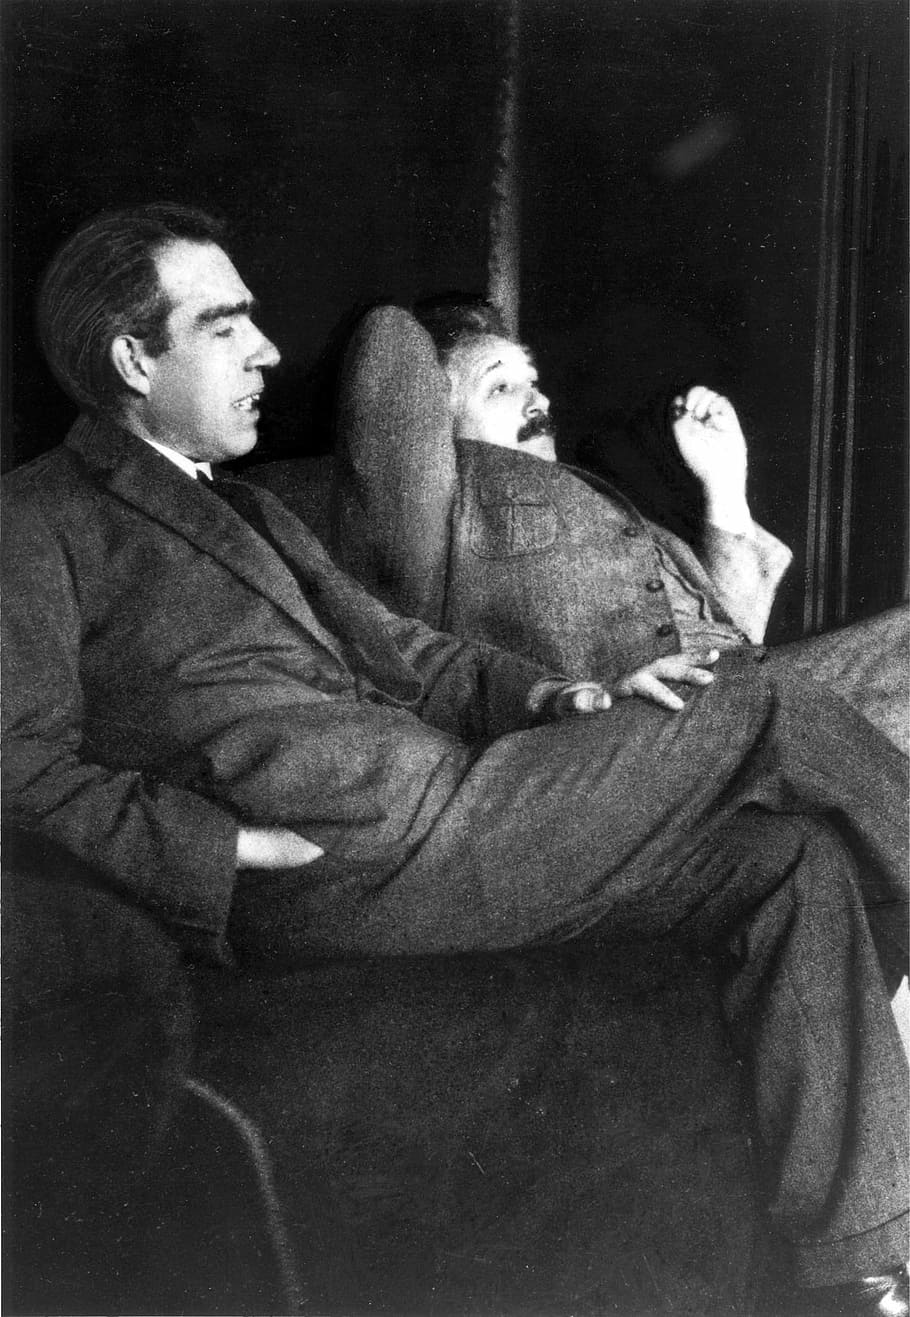 Albert Einstein And Niels Bohr, 1925, casual, discussion, personalities of the twentieth century